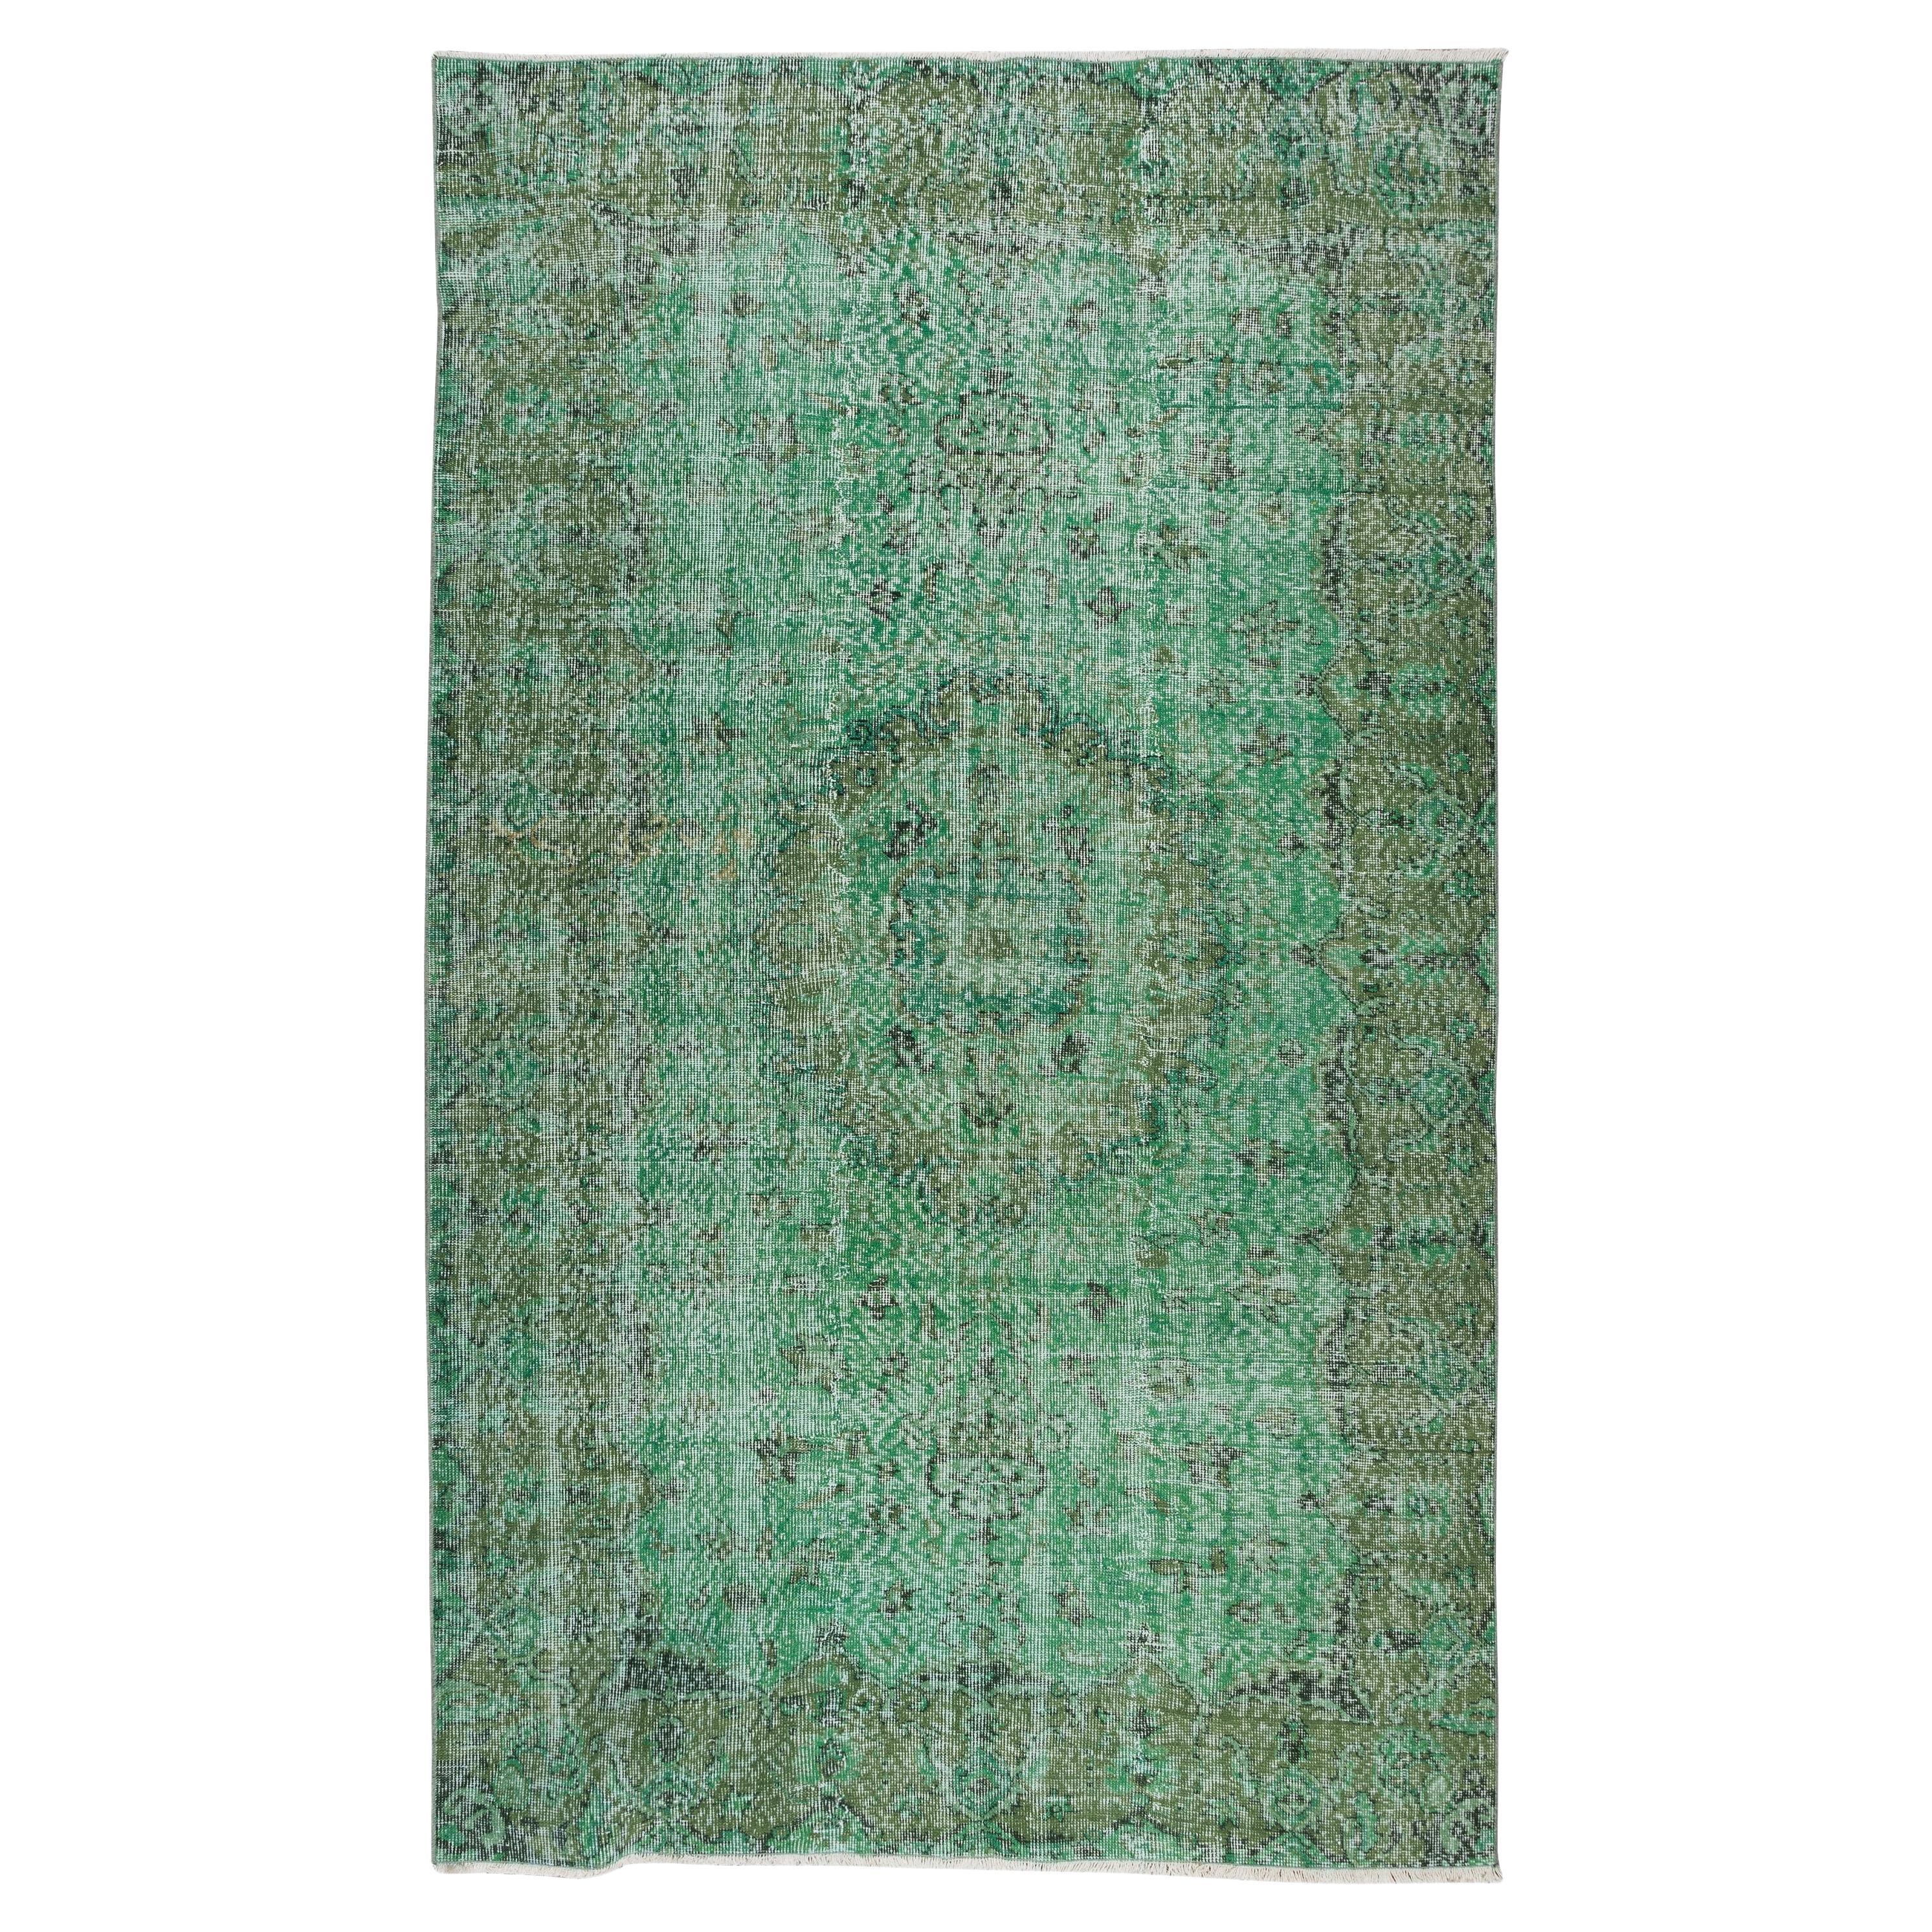 5.6x9.5 Ft Handmade Vintage Turkish Rug Over-Dyed in Green for Modern Interiors For Sale